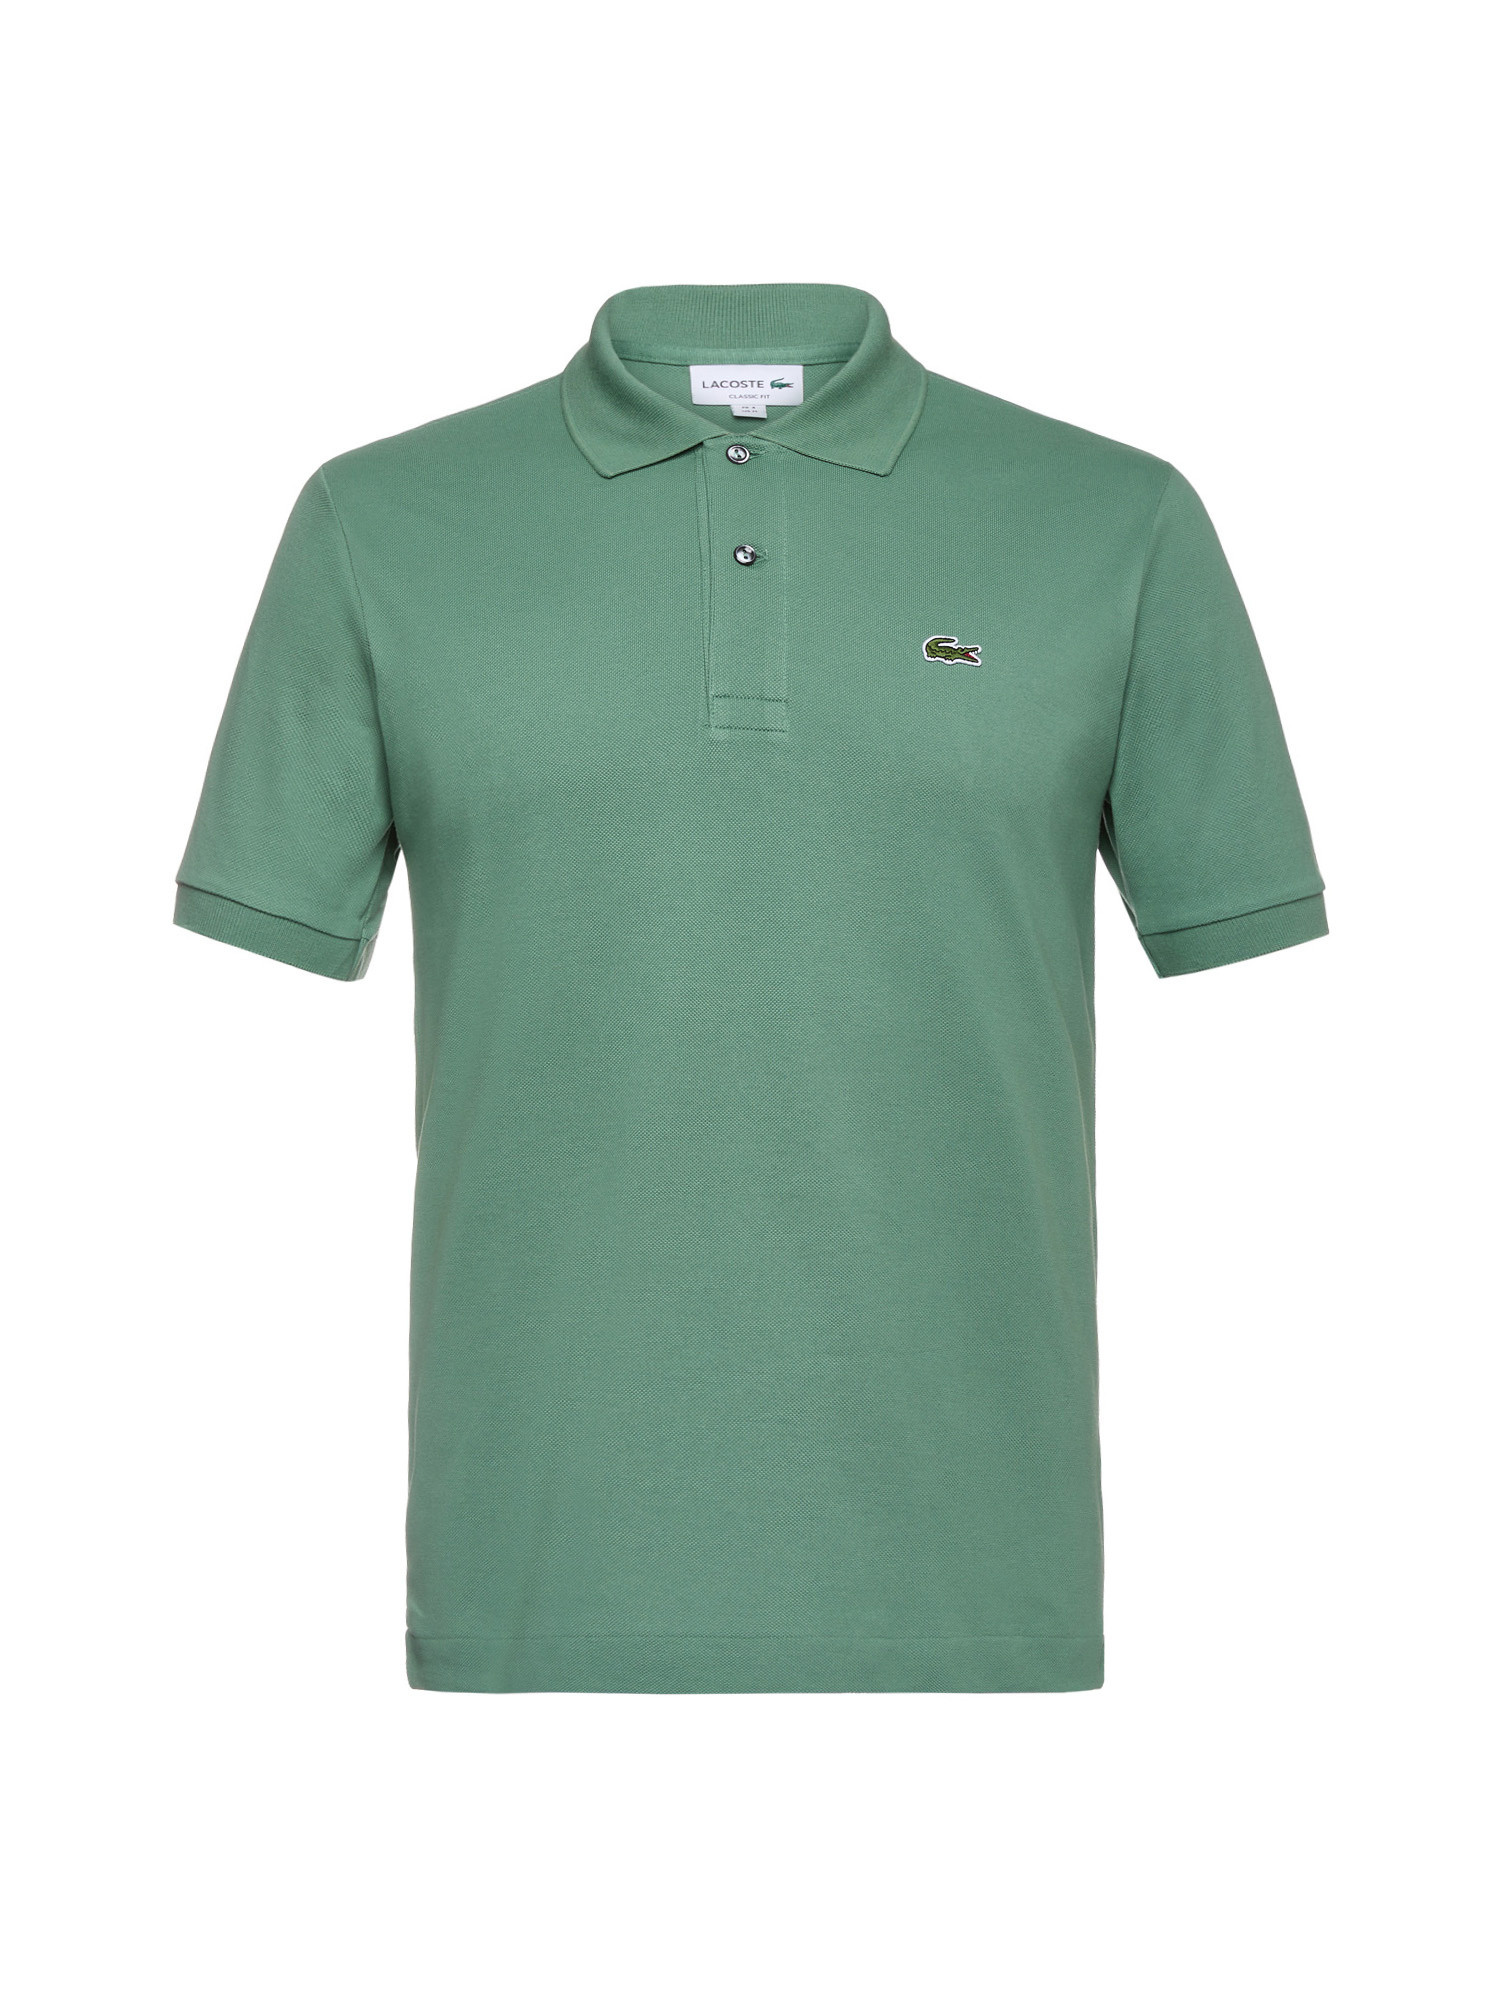 Lacoste - Classic cut polo shirt in petit piquè cotton, Sage Green, large image number 0